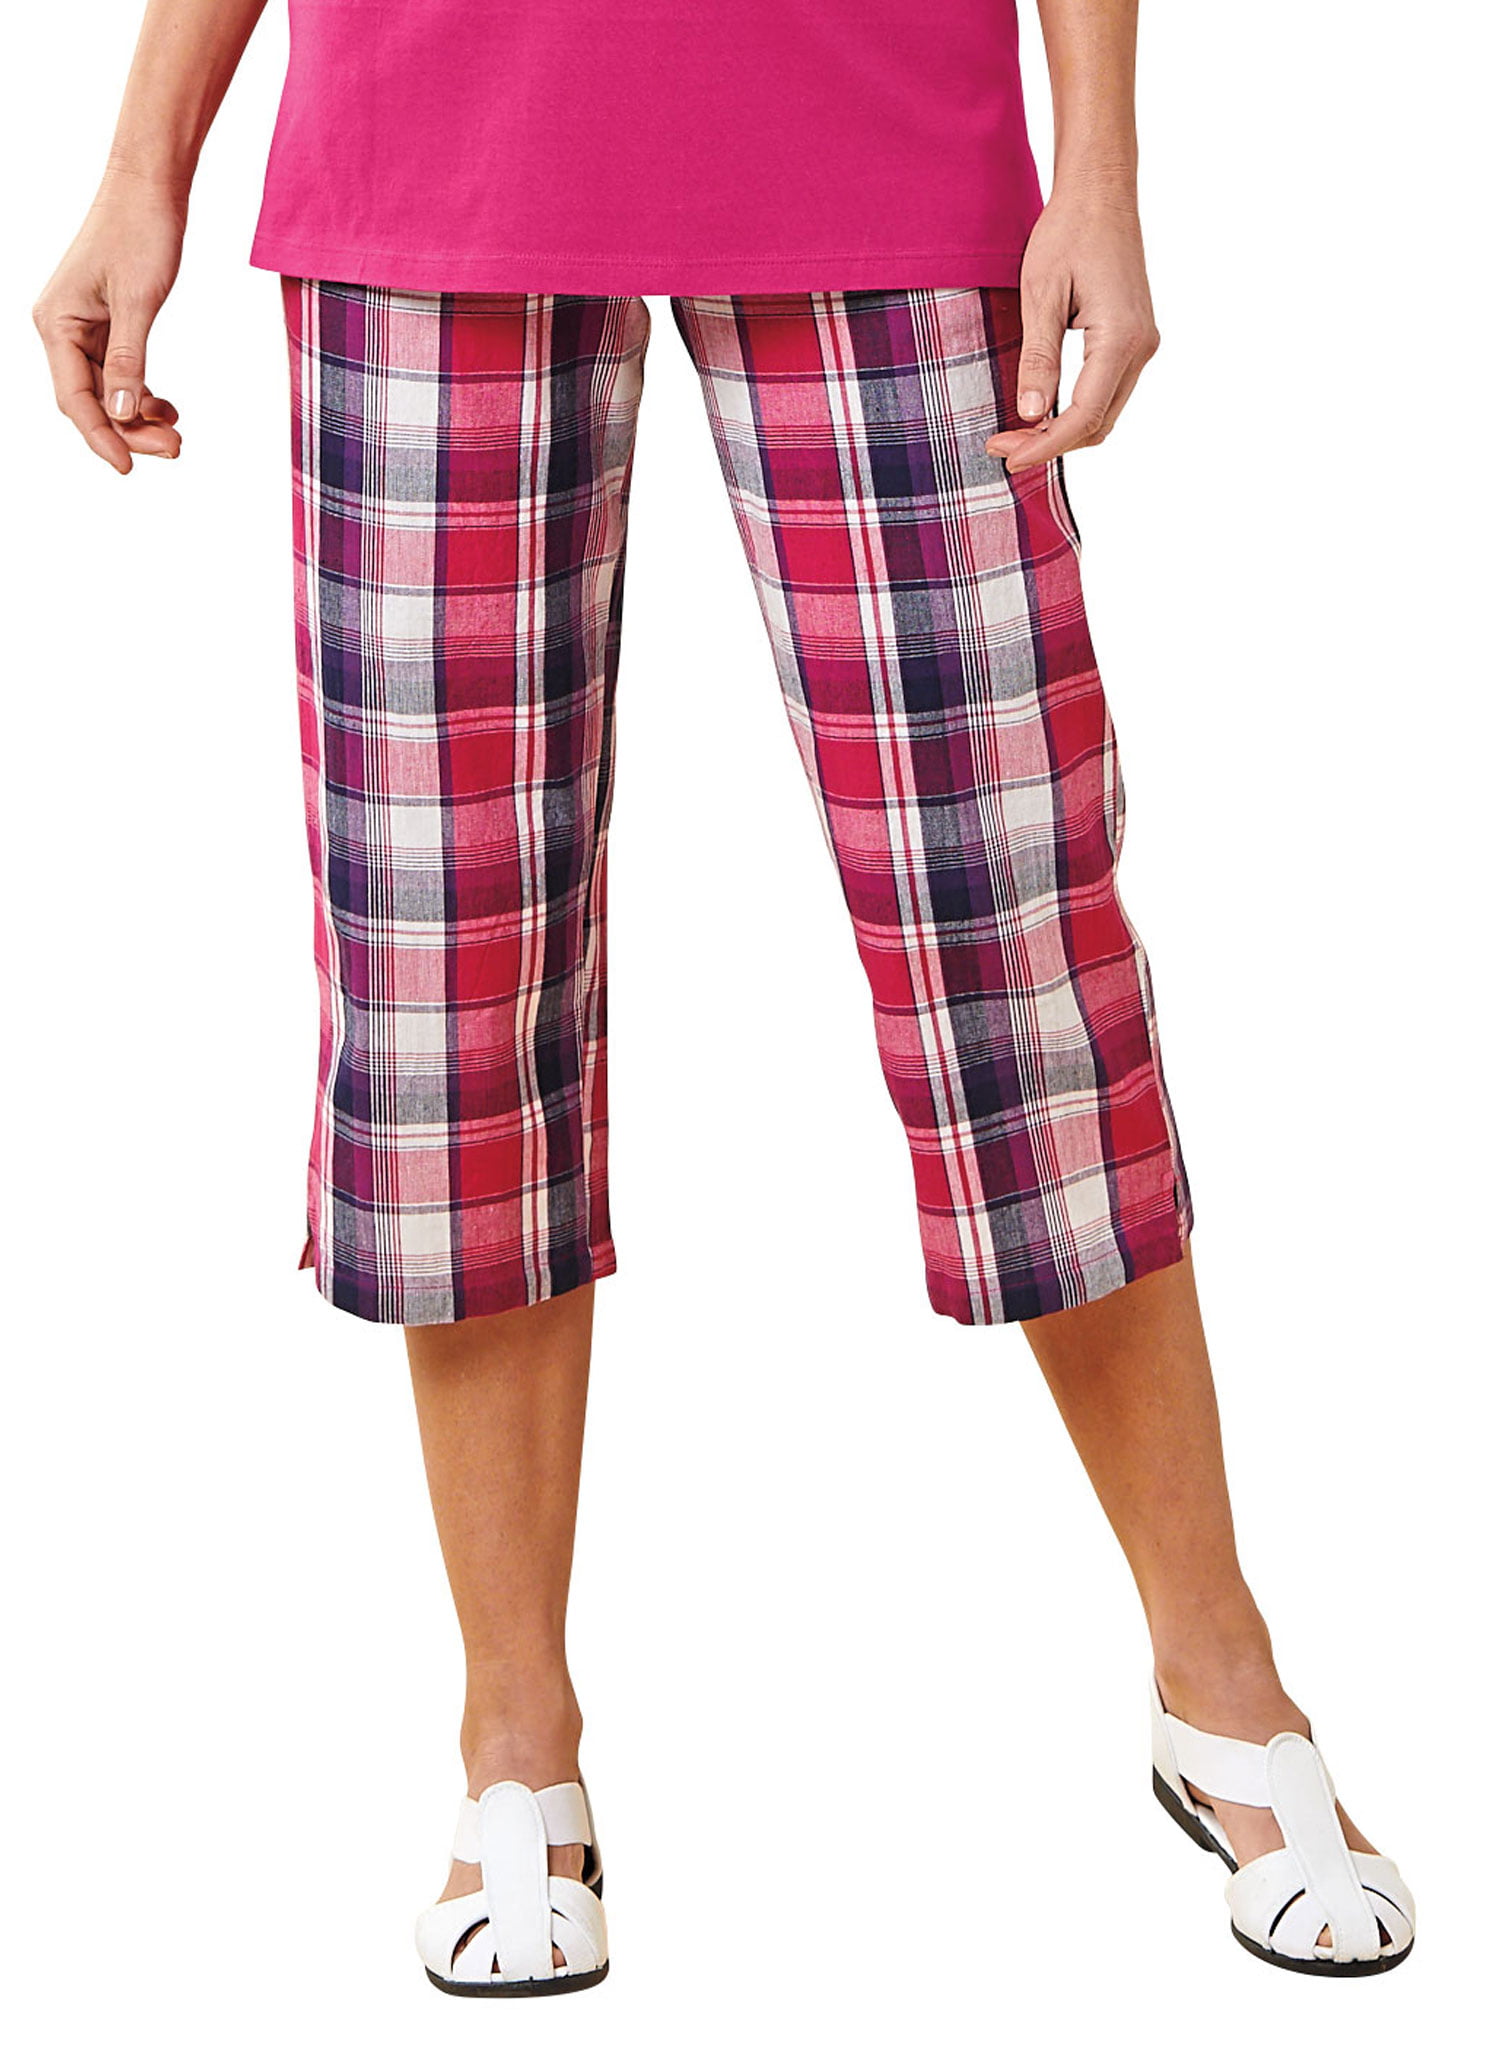 Plaid Capri Pants for Women  Casual Relaxed Fit Wide Leg Pants with  Pockets 